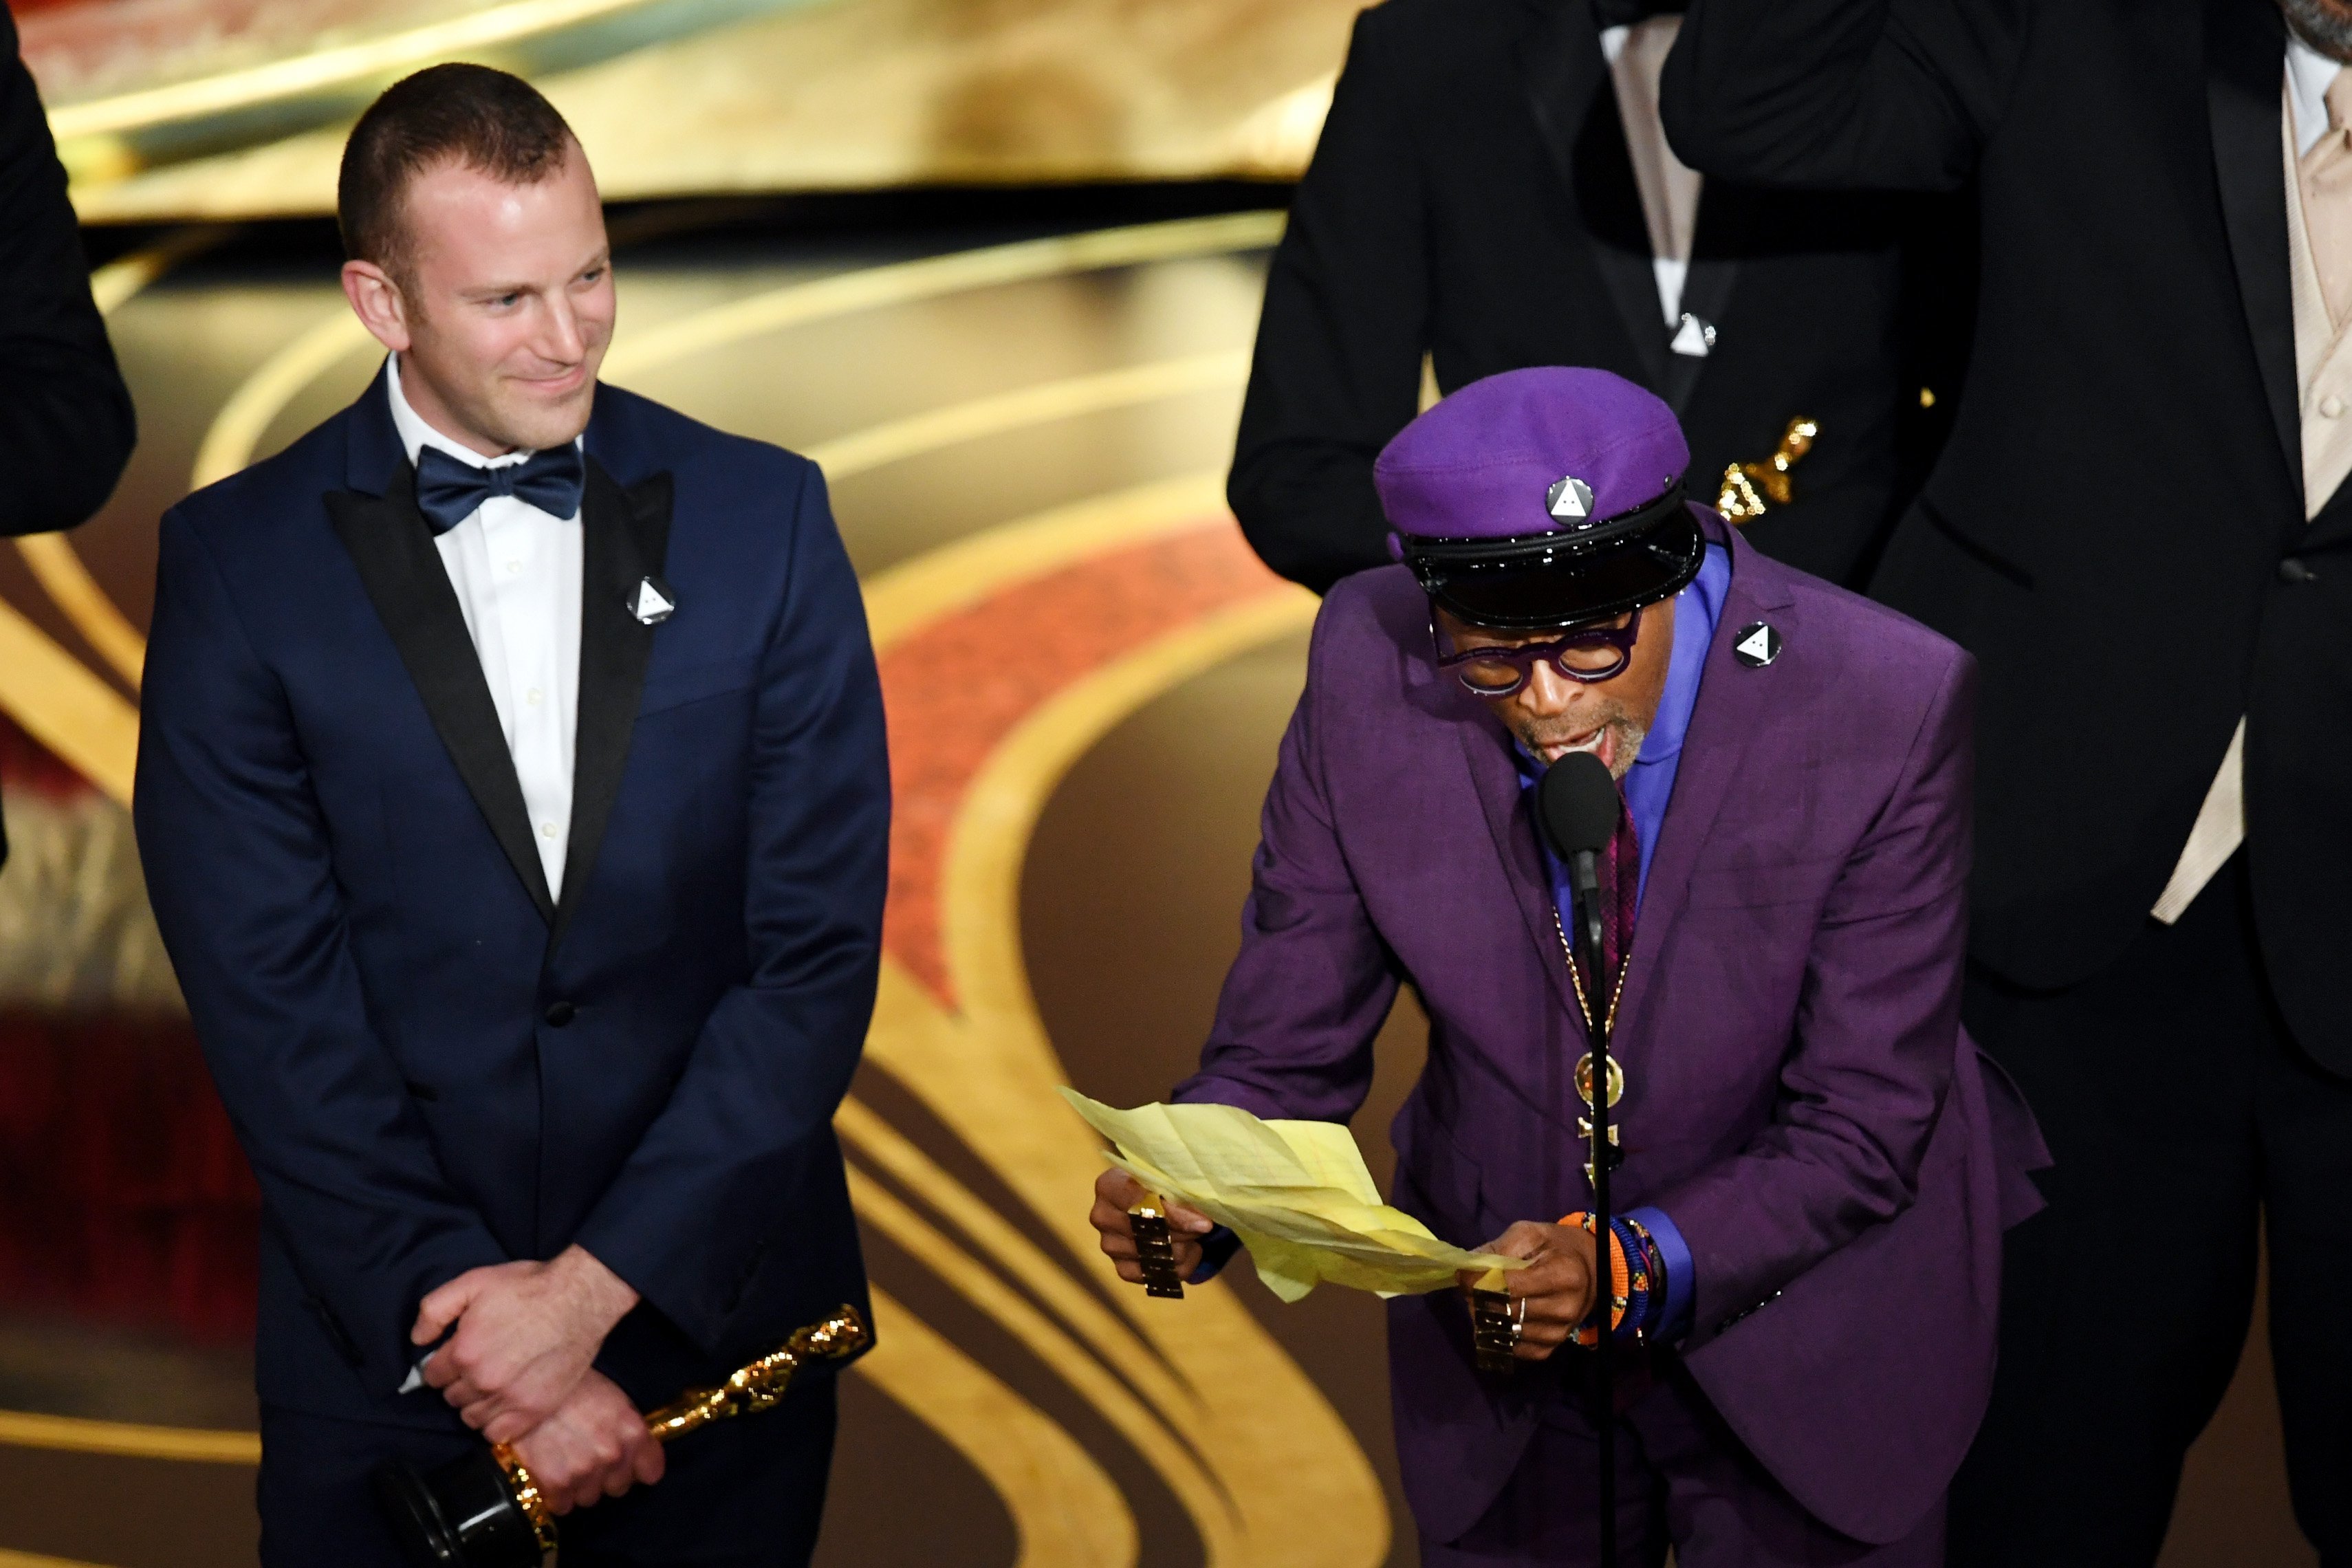 Spike Lee and Charlie Wachtel accepting the Academy Award for 'BlacKkKlansman' at the 91st Annual Academy Awards | Photo: Getty Images